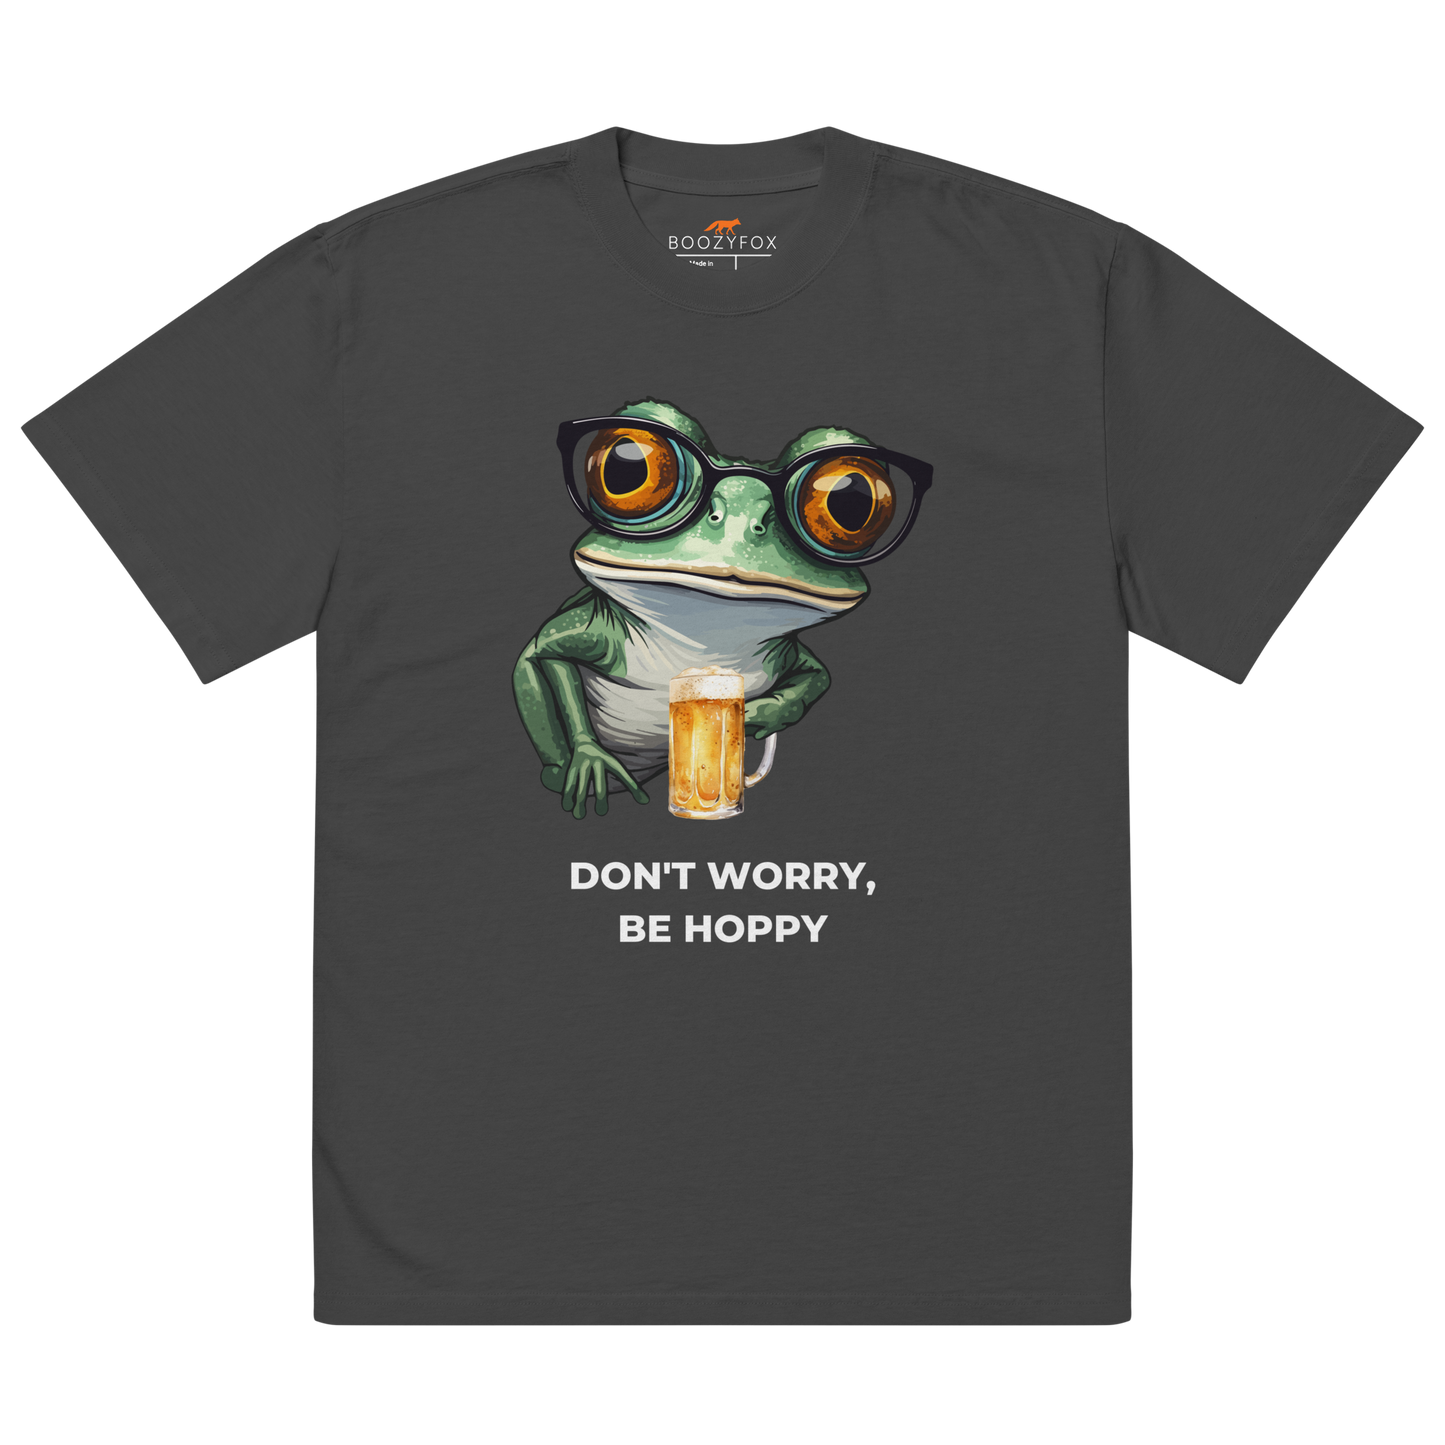 Faded Black Frog Oversized T-Shirt featuring a ribbitting Don't Worry, Be Hoppy graphic on the chest - Funny Graphic Frog Oversized Tees - Boozy Fox